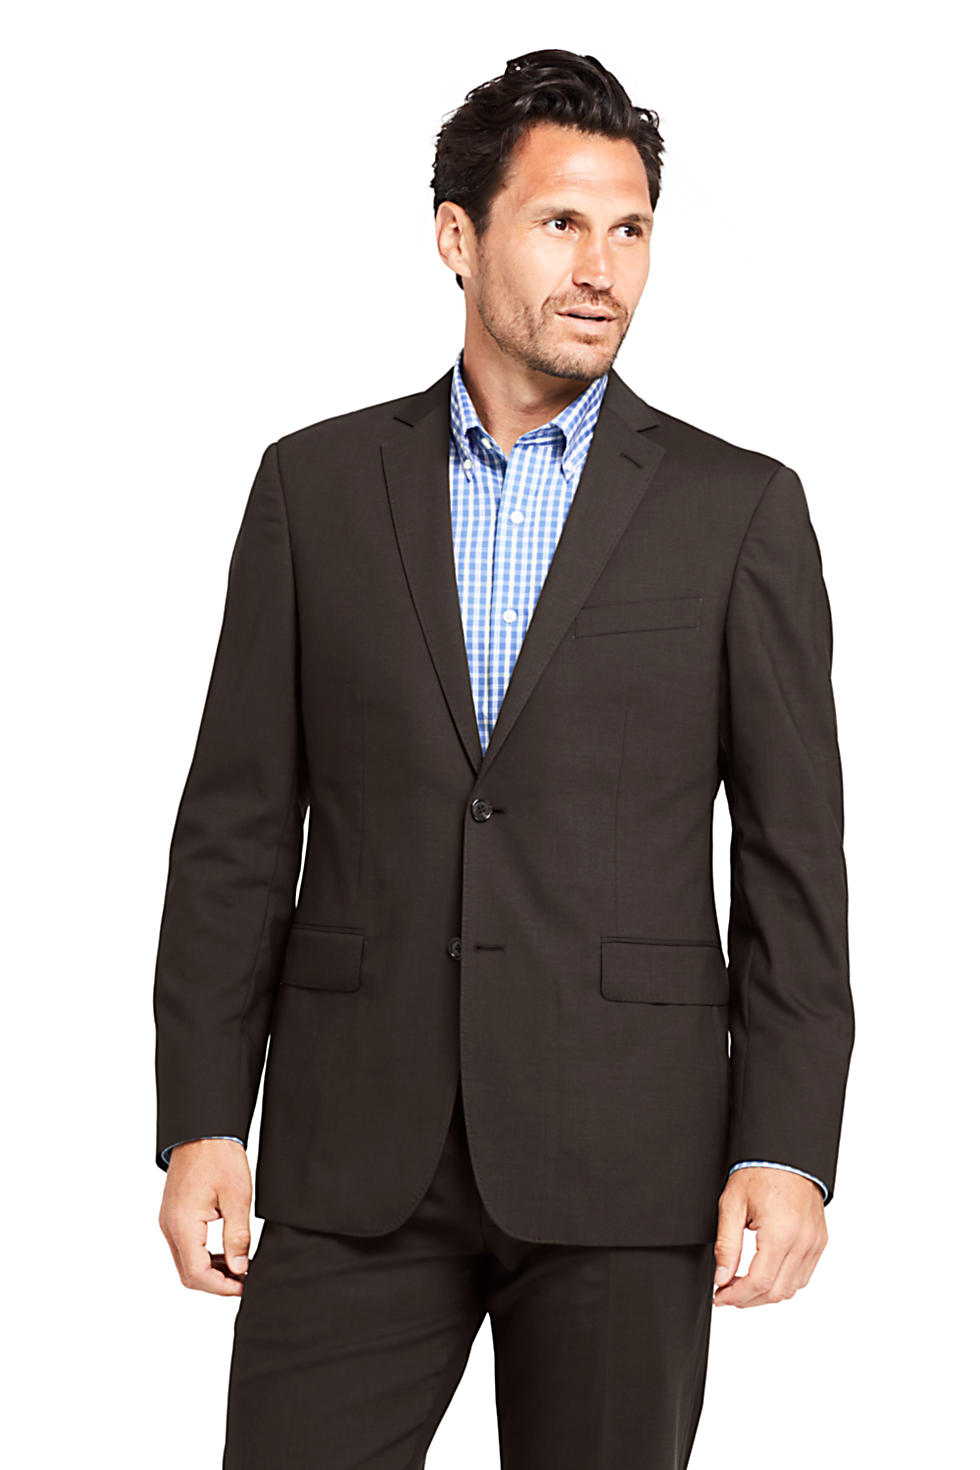 Lands End Men's Traditional Fit Comfort-First Year'rounder Suit Jacket (in 3 colors)